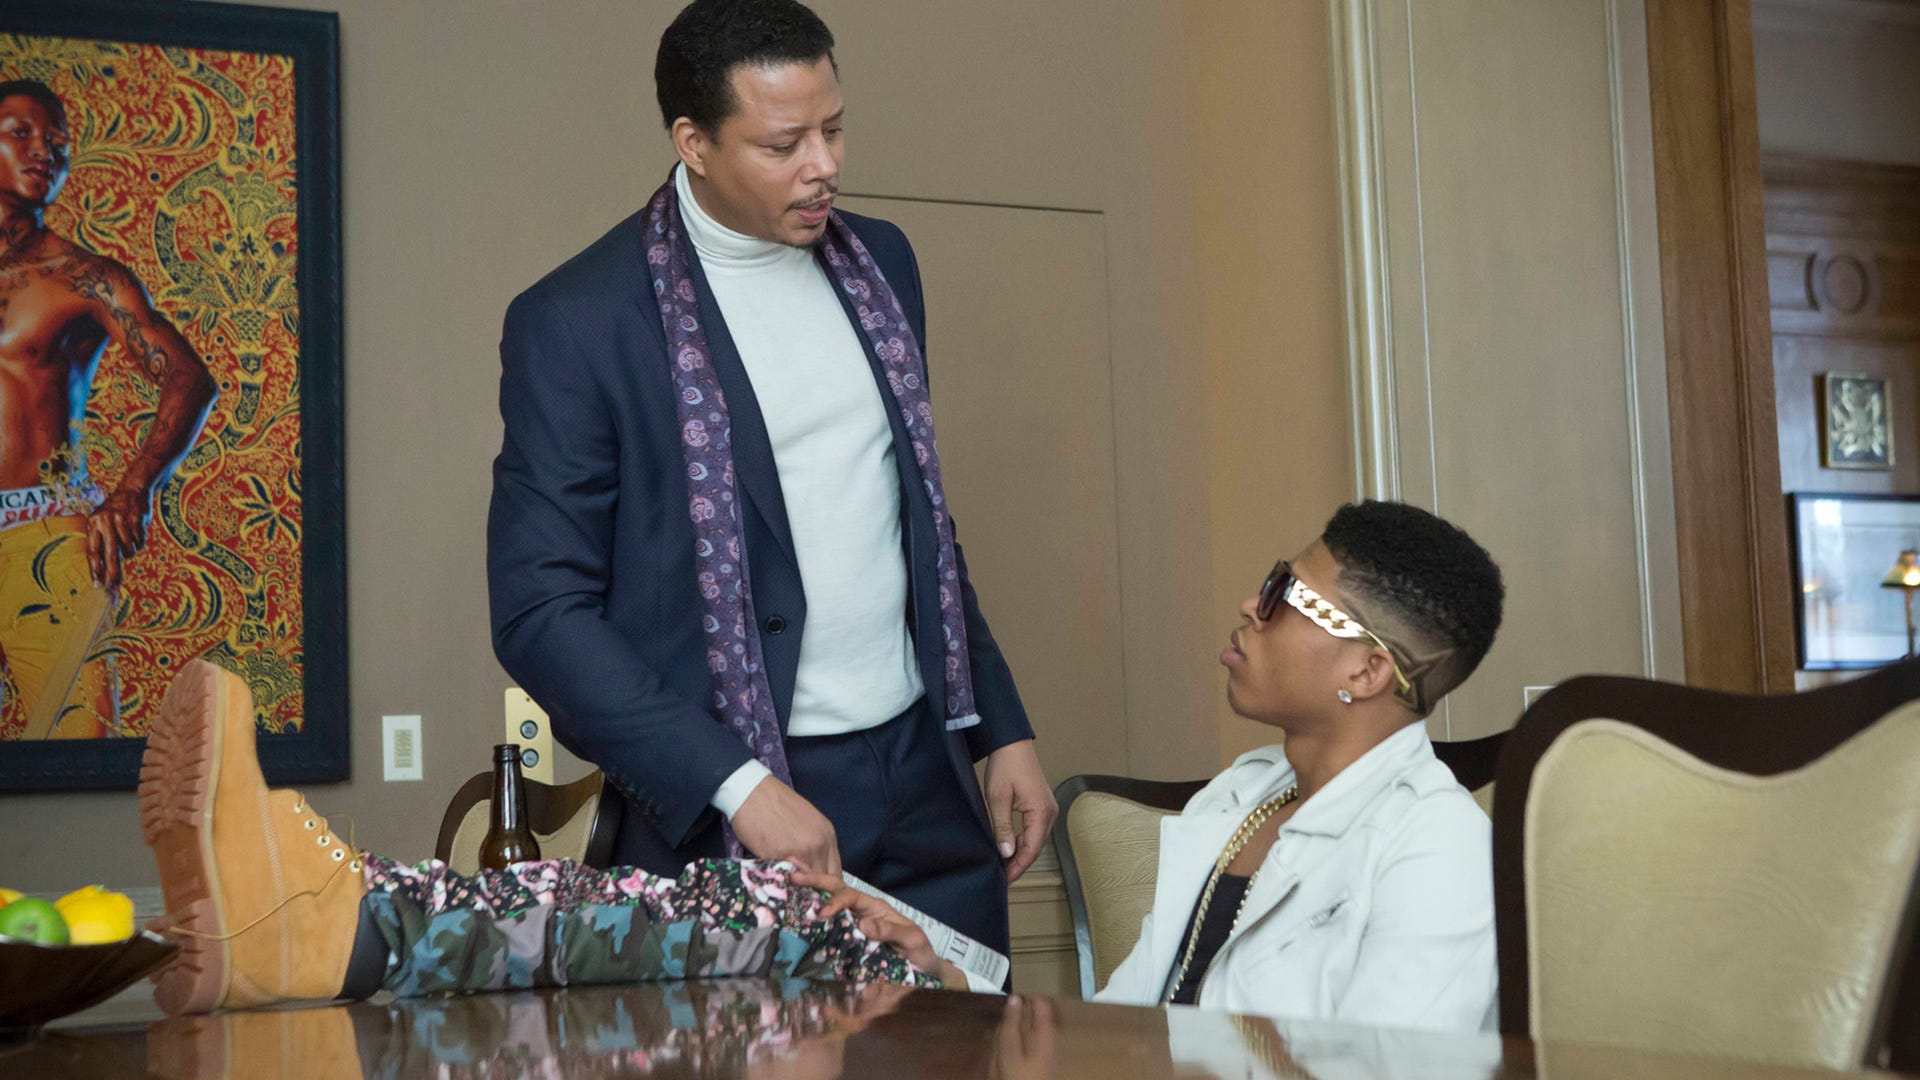 Terrence Howard and Bryshere Gray, Empire